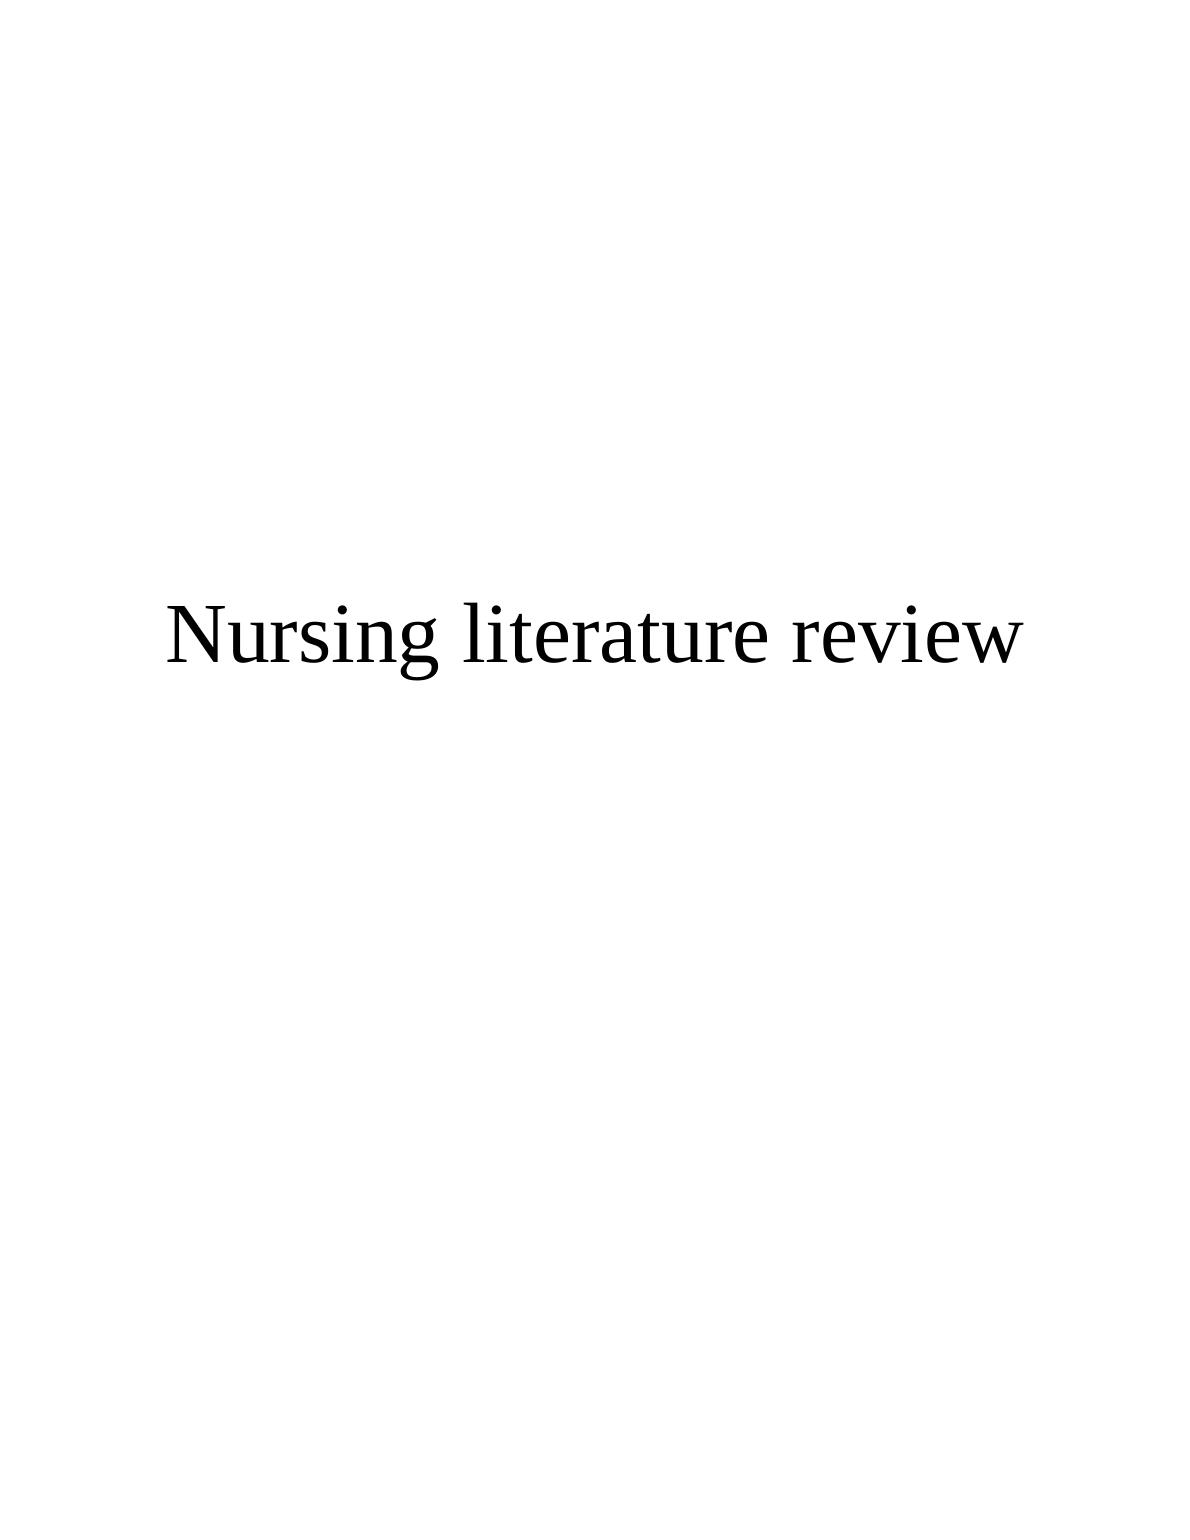 journal of clinical nursing literature review